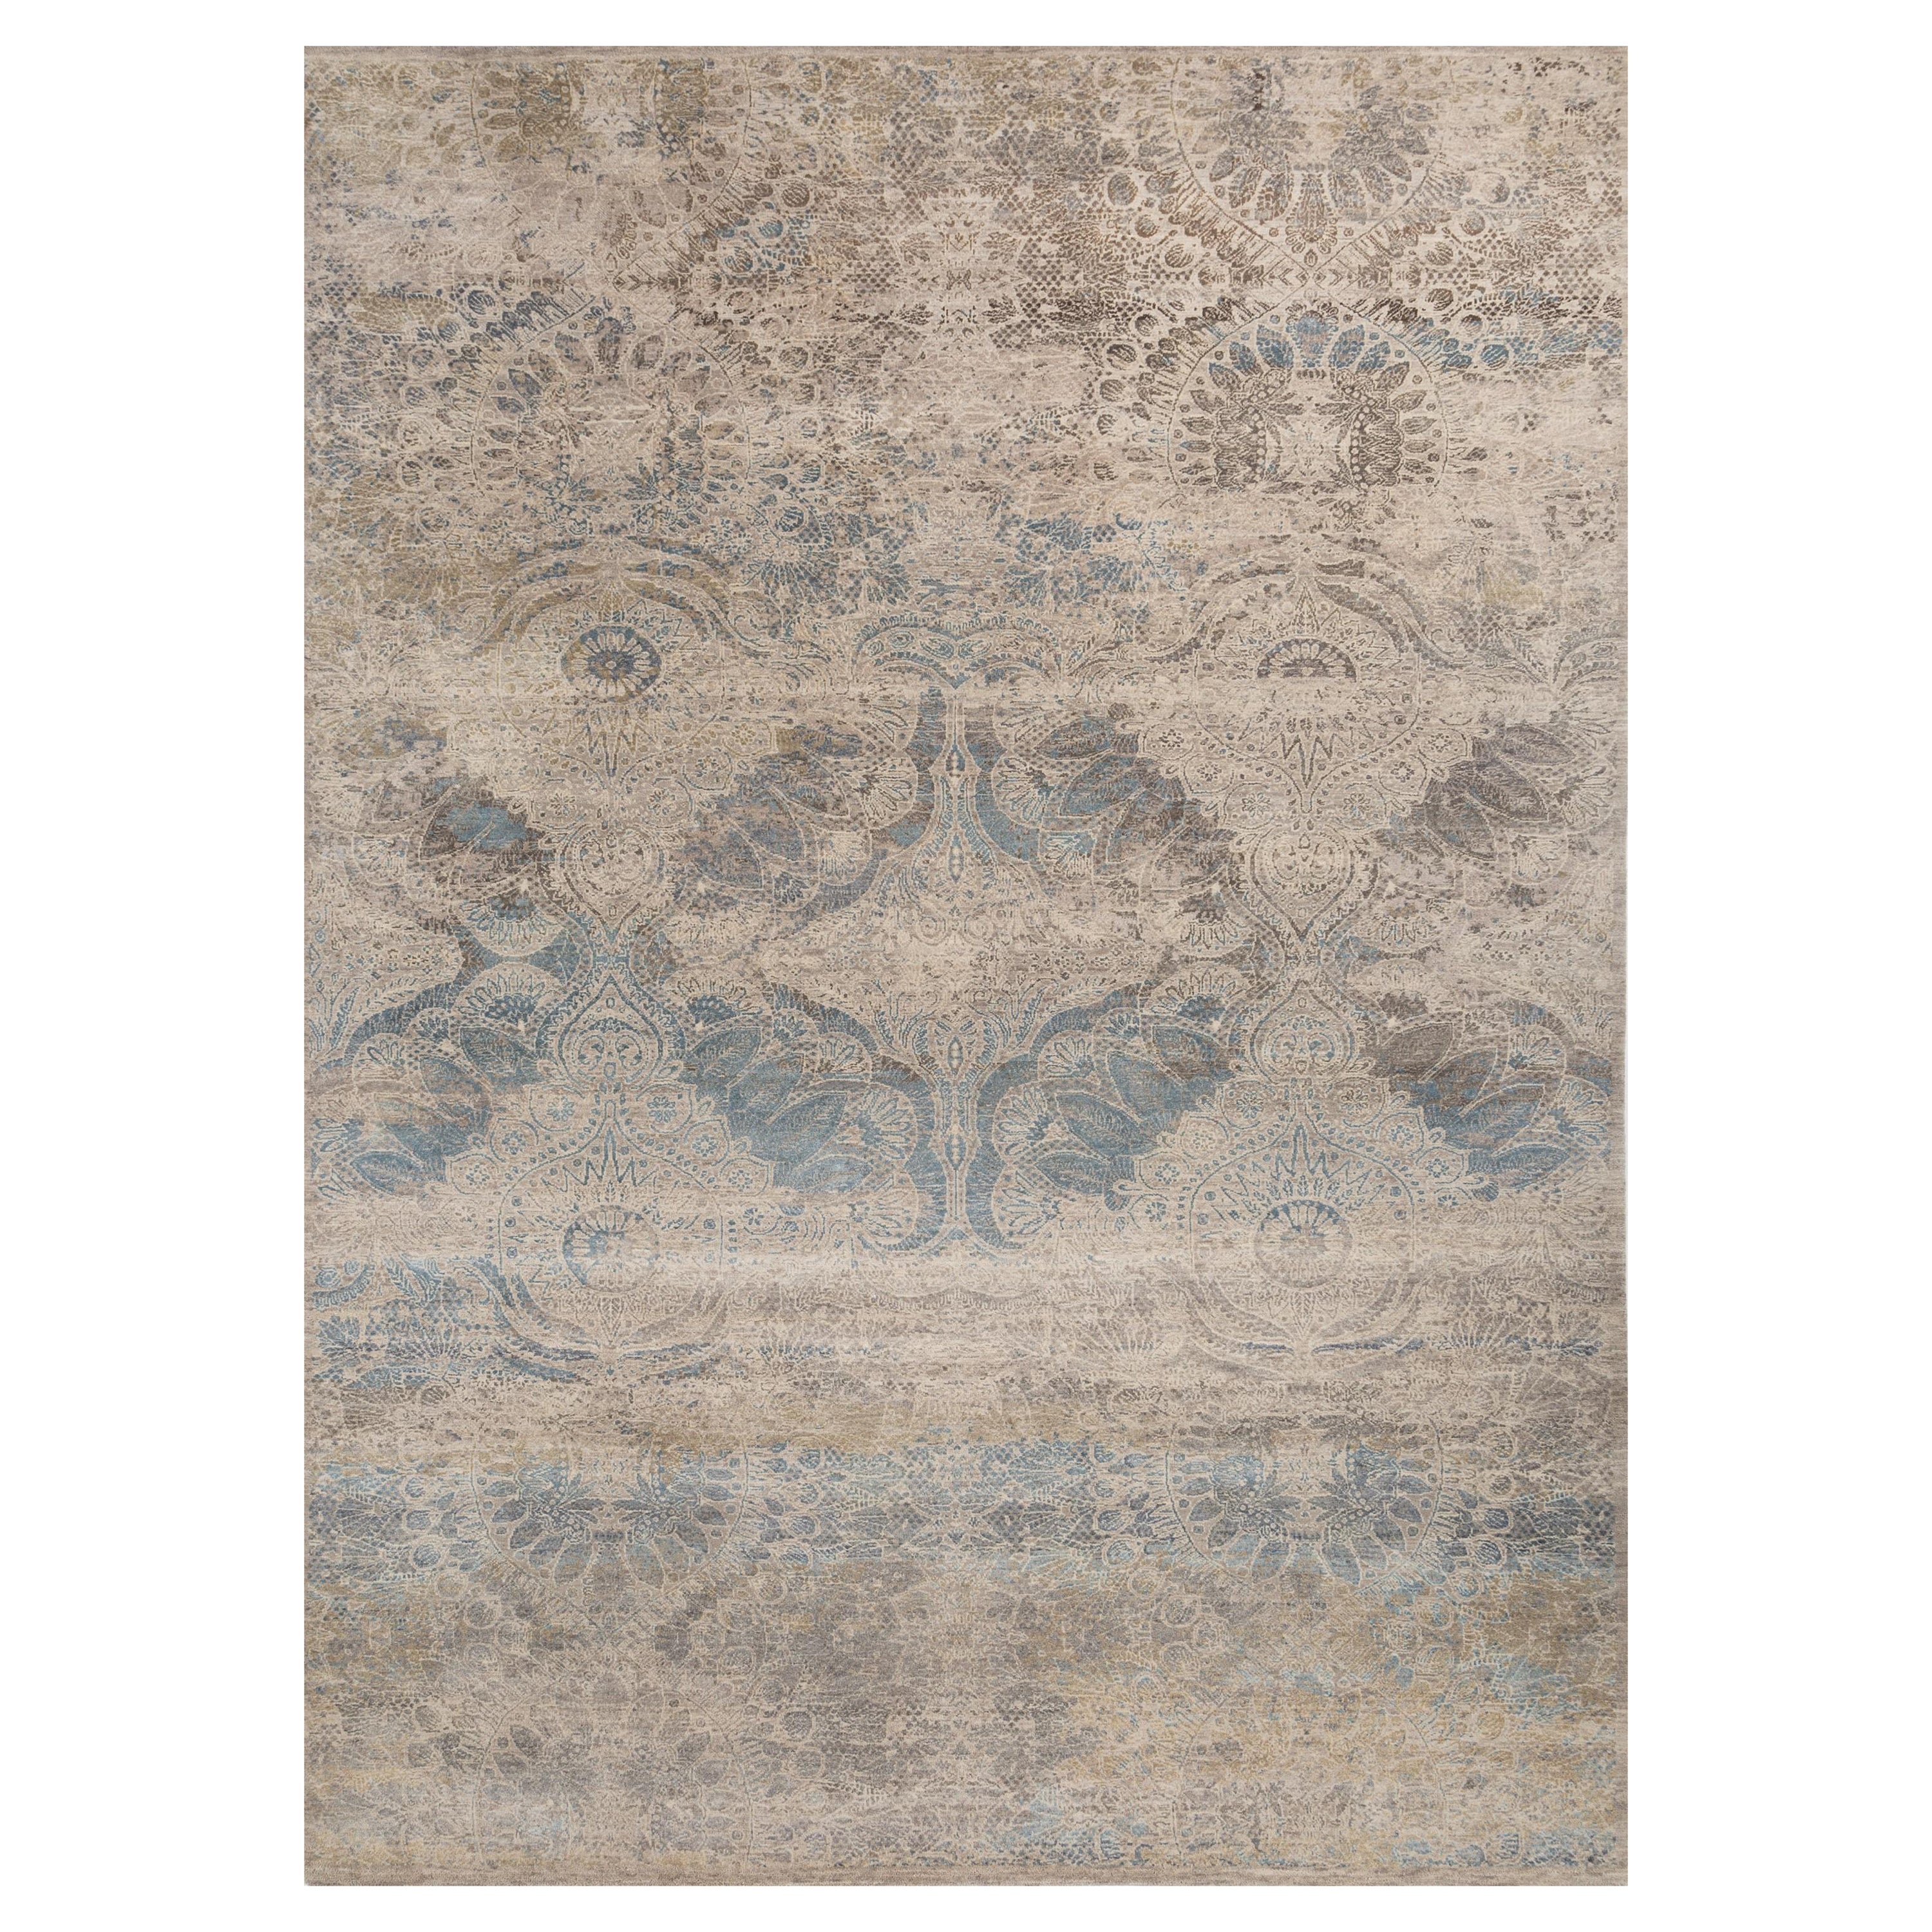 Timeless bloom classic gray & linen white 195X295 cm handknotted rug For Sale